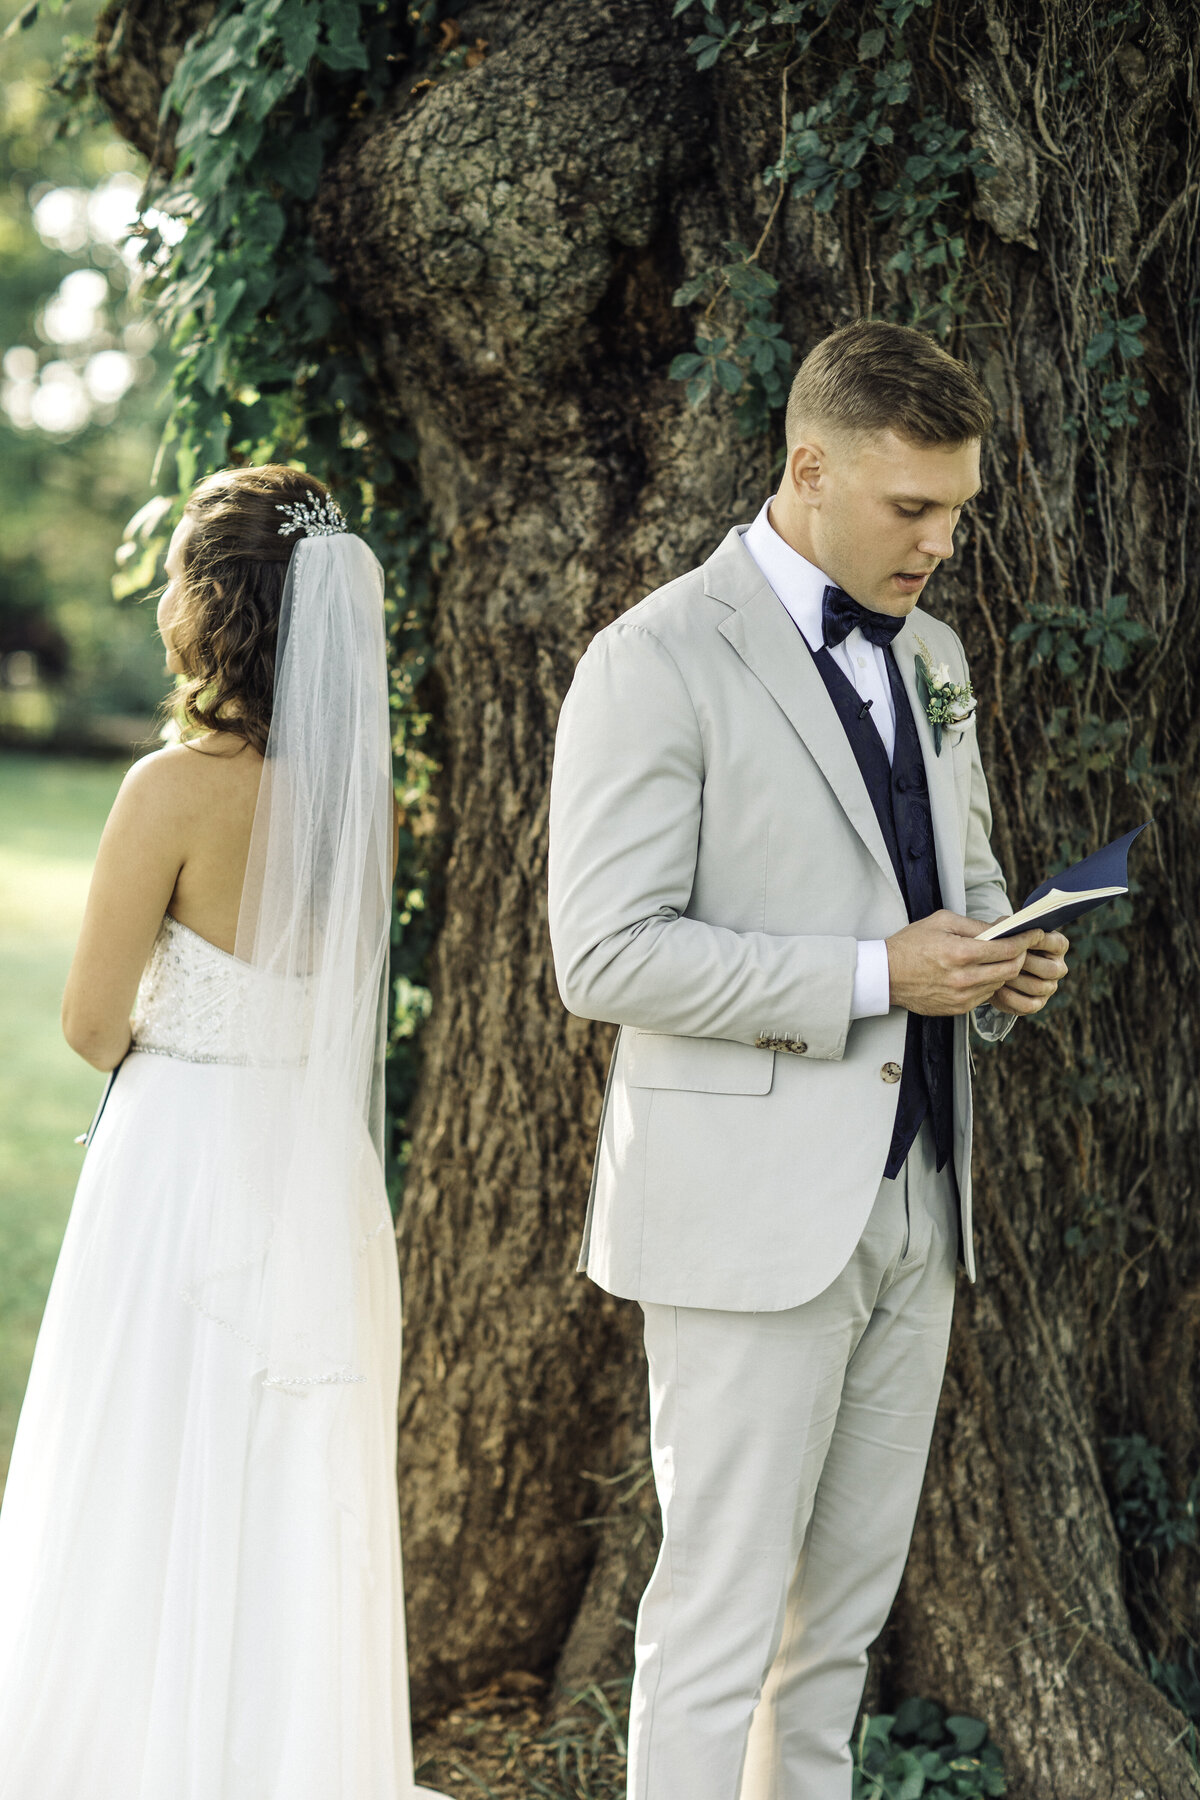 Wedding Photograph Of Groom Holding a Booklet Los Angeles